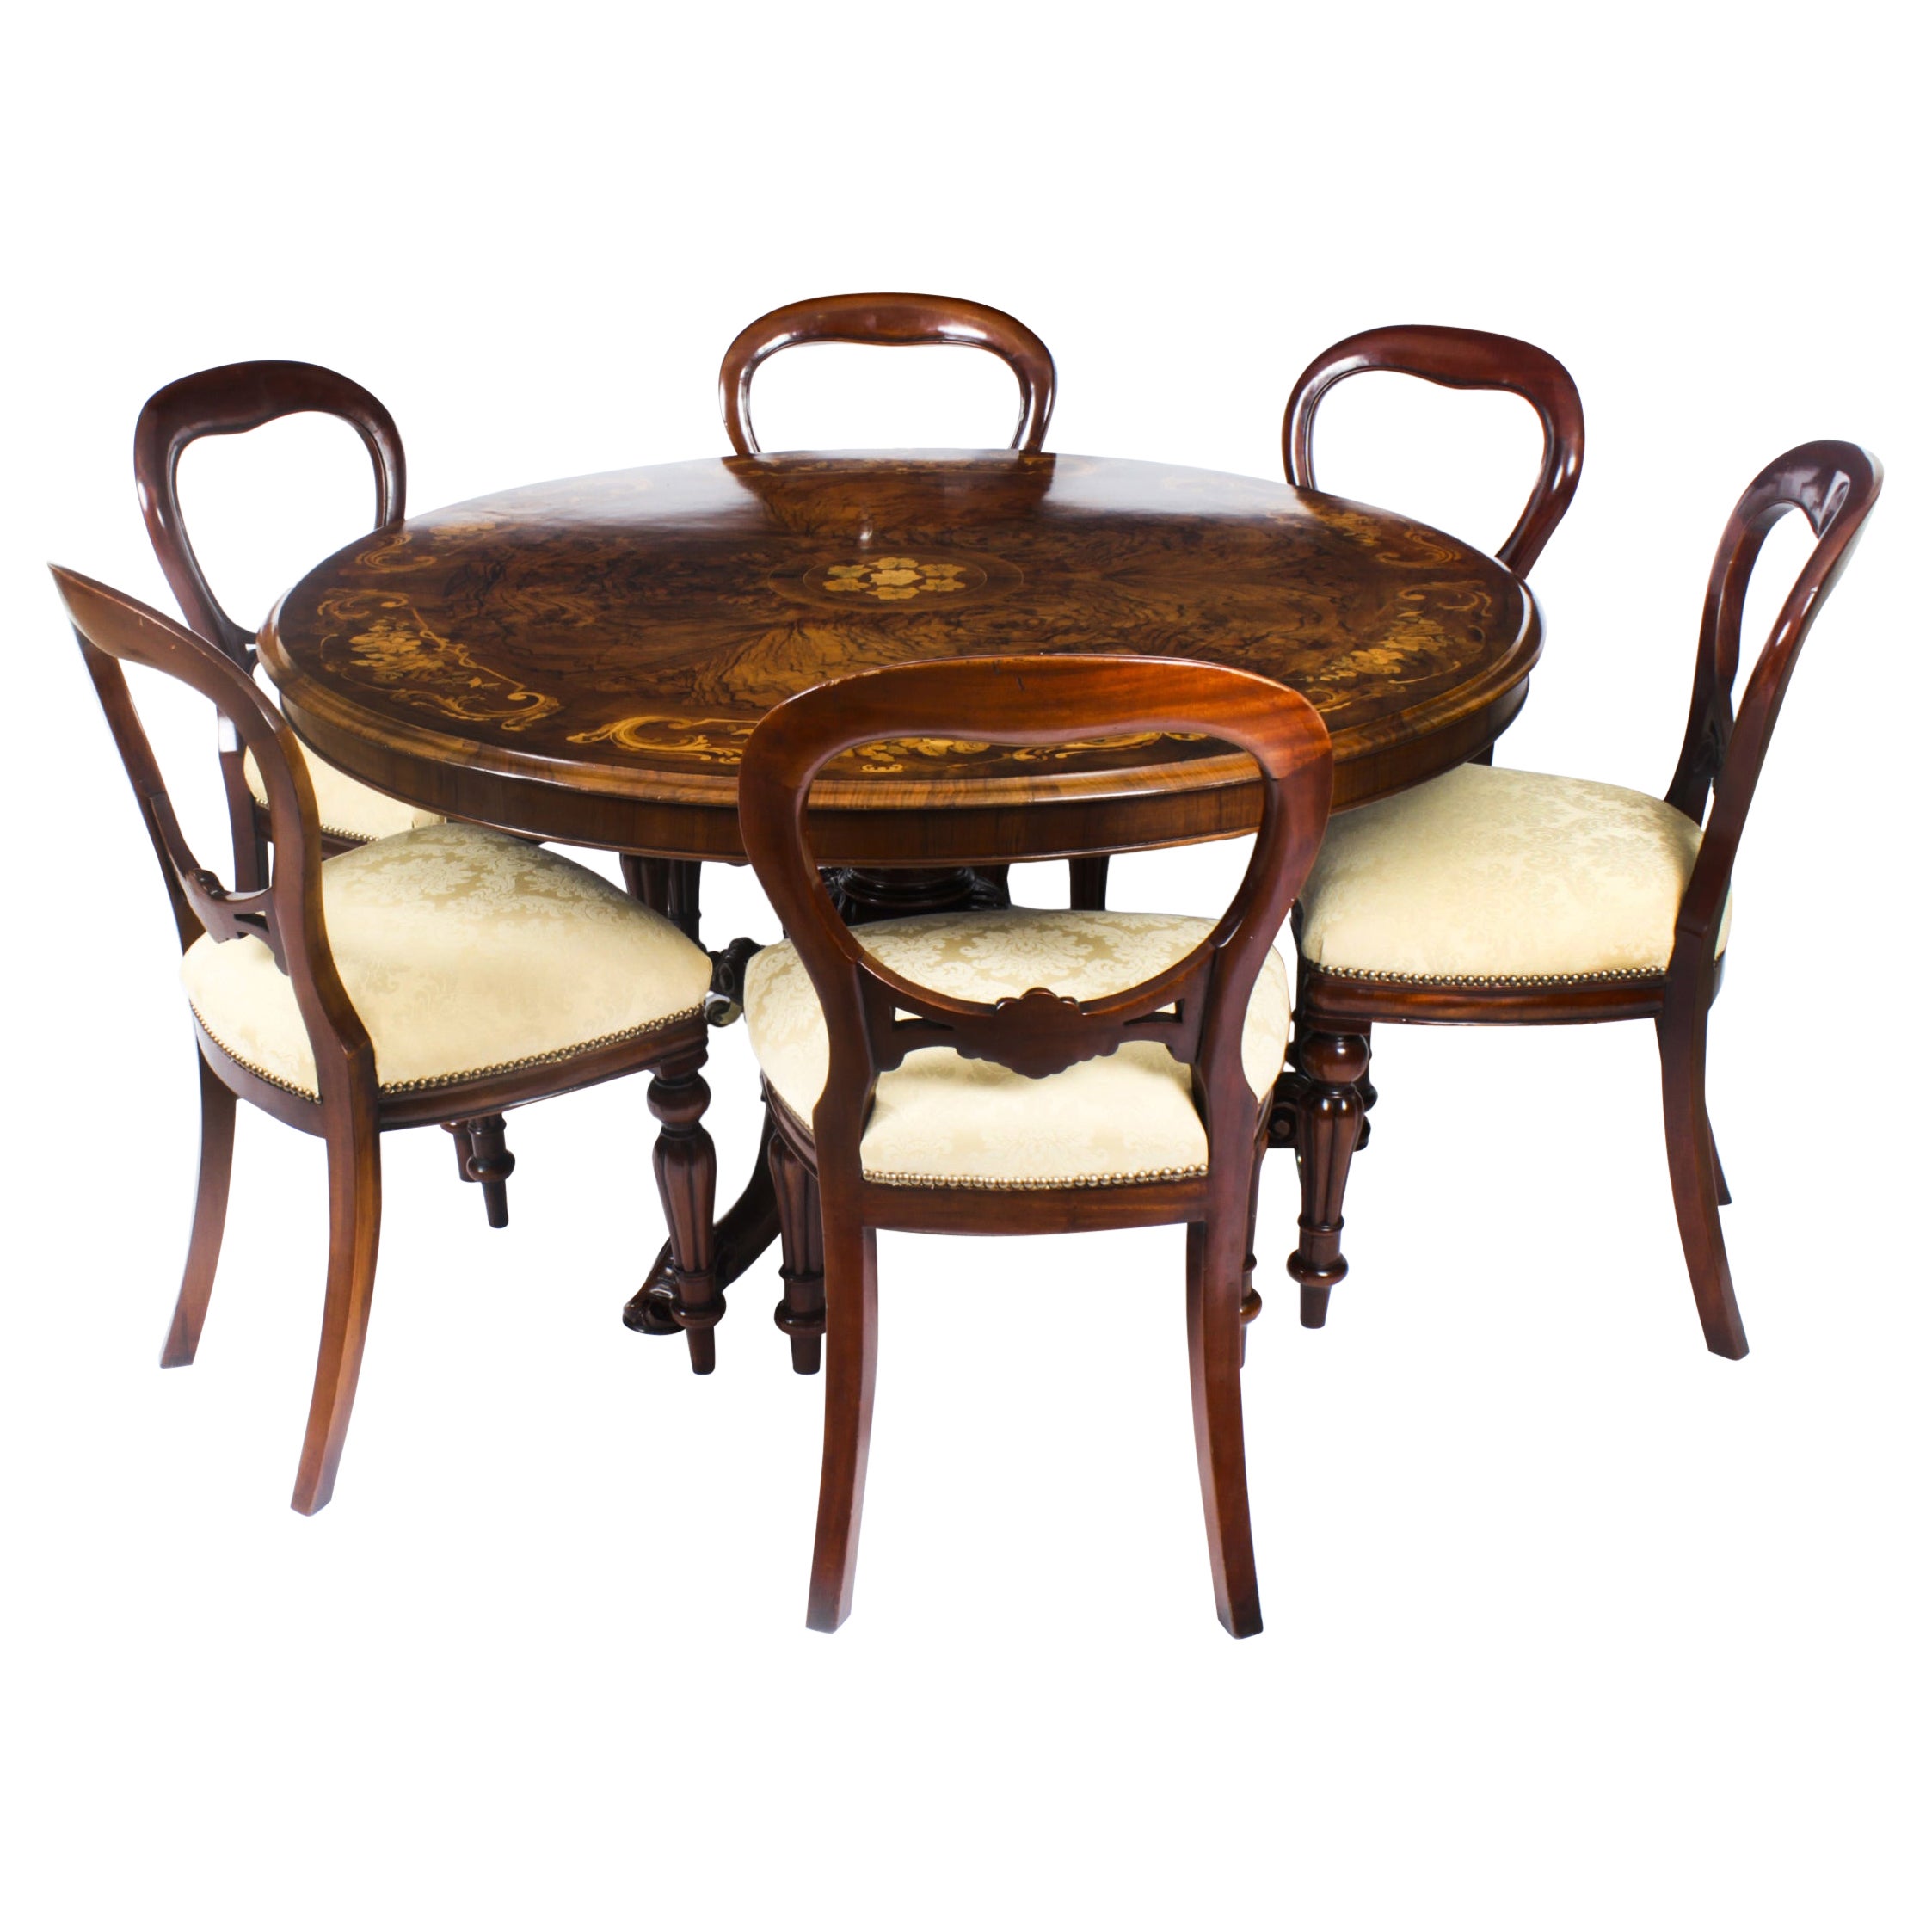 Antique Round Burr Walnut Marquetry Loo Table 19th C & 6 Vintage Chairs